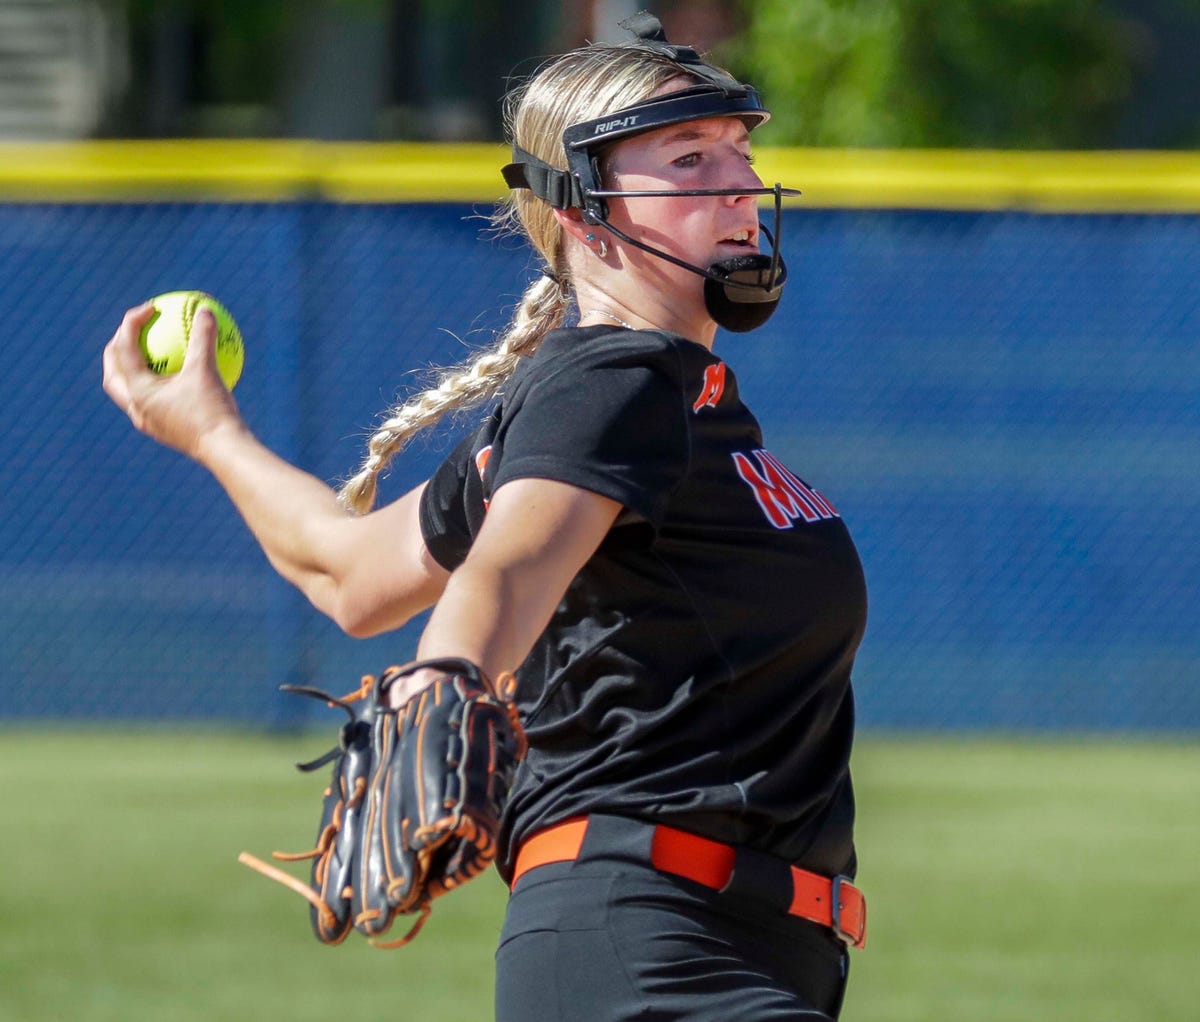 Kiran Sanford Dominates Softball: Leads State in No-Hitters & Earns Elite Recognition